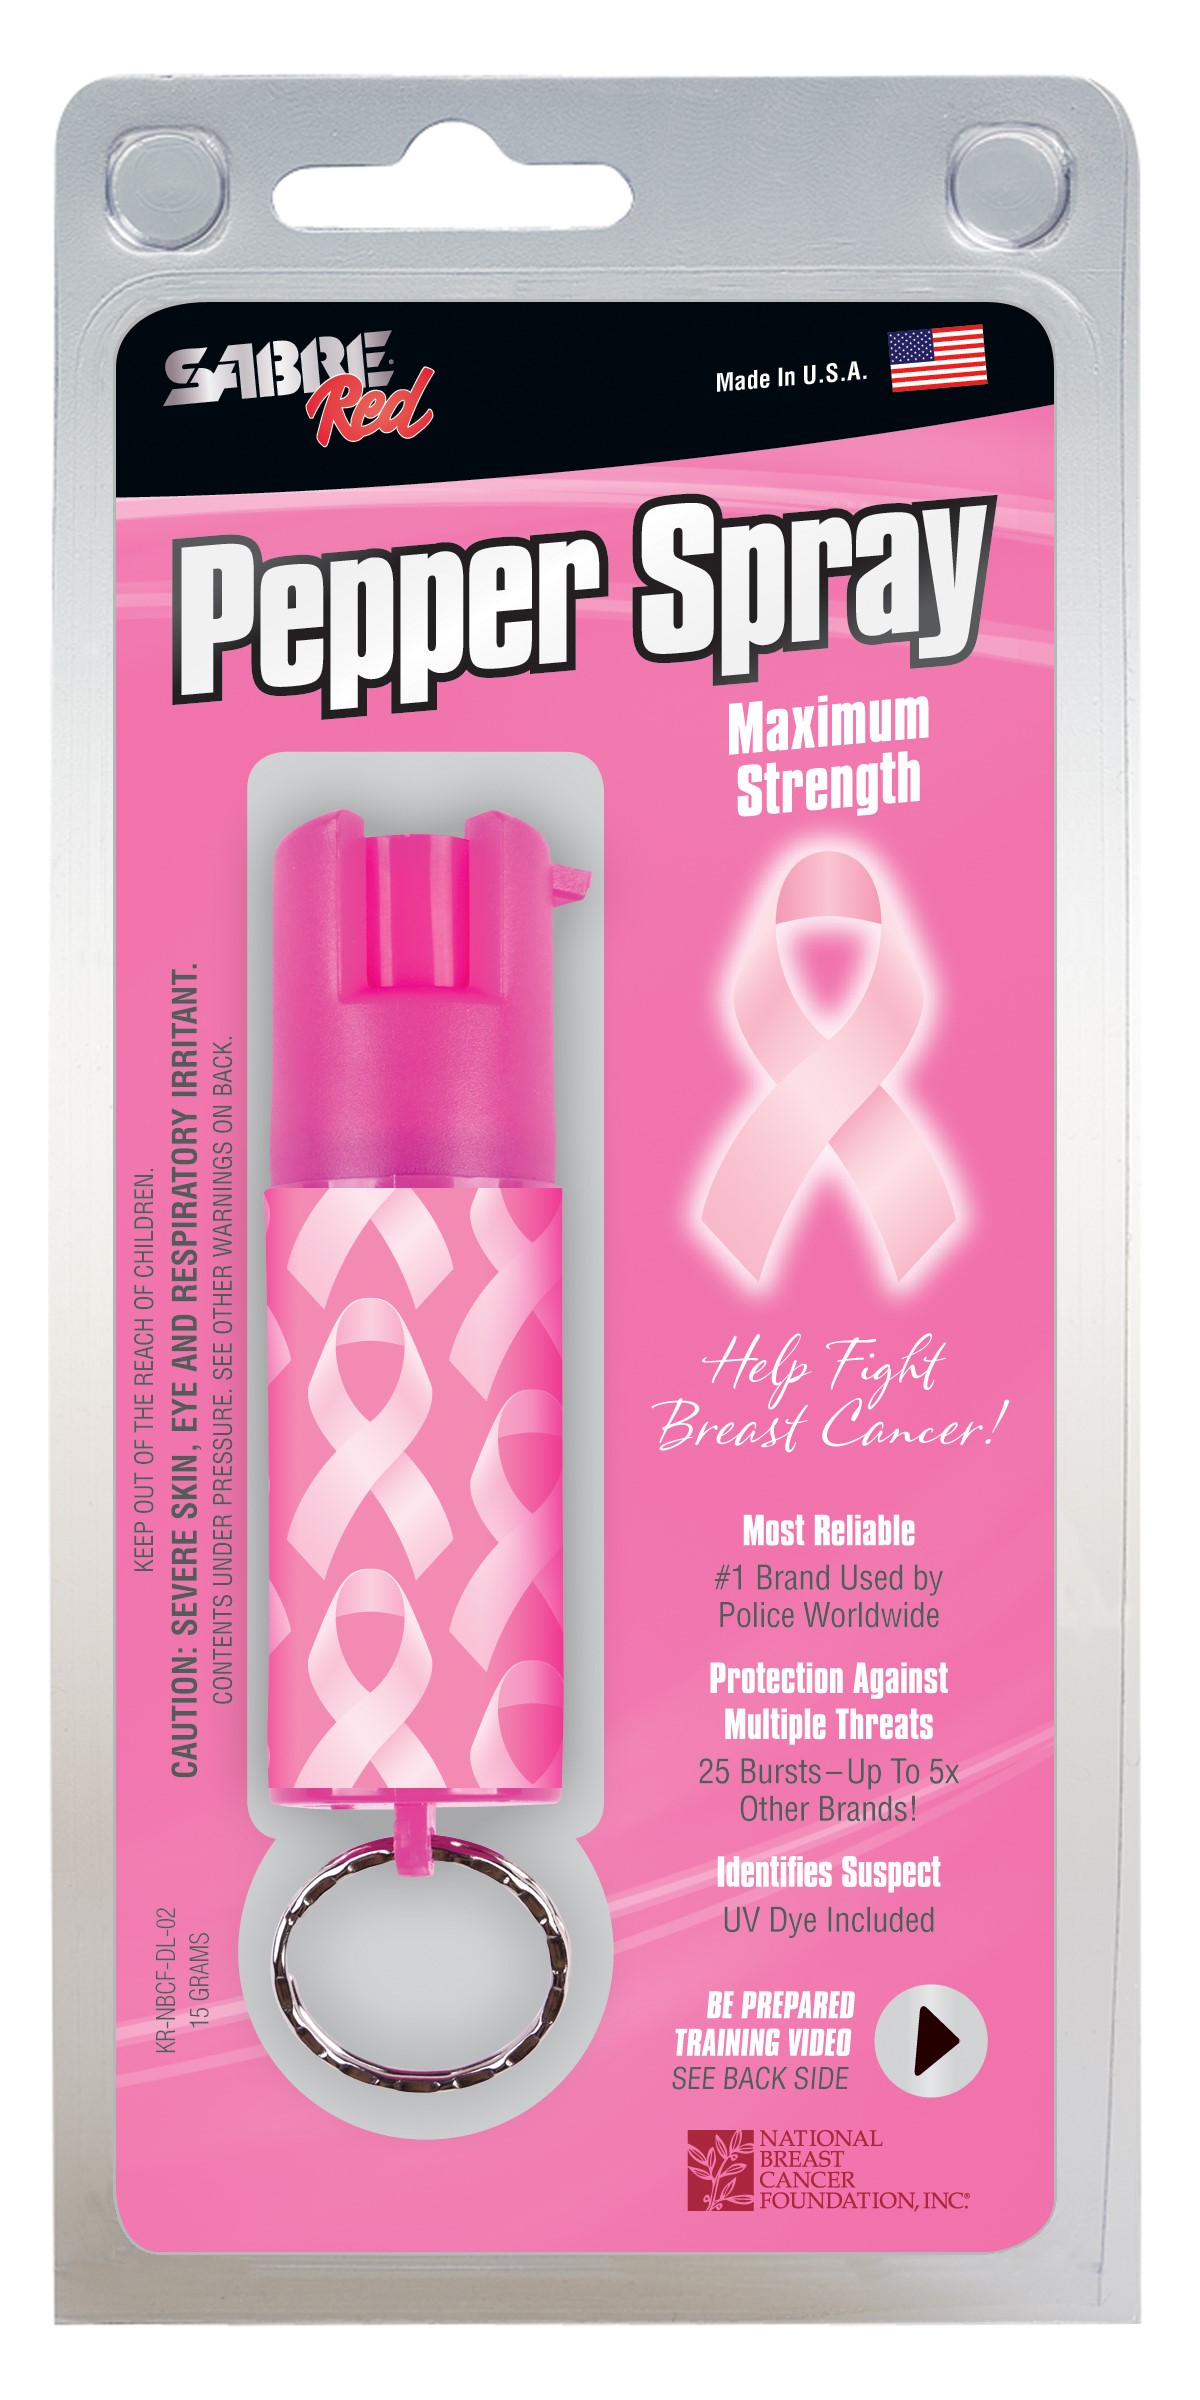 Attractive pepper spray with pink ribbons supports National Breast Cancer Foundation by Security Equipment Corporation